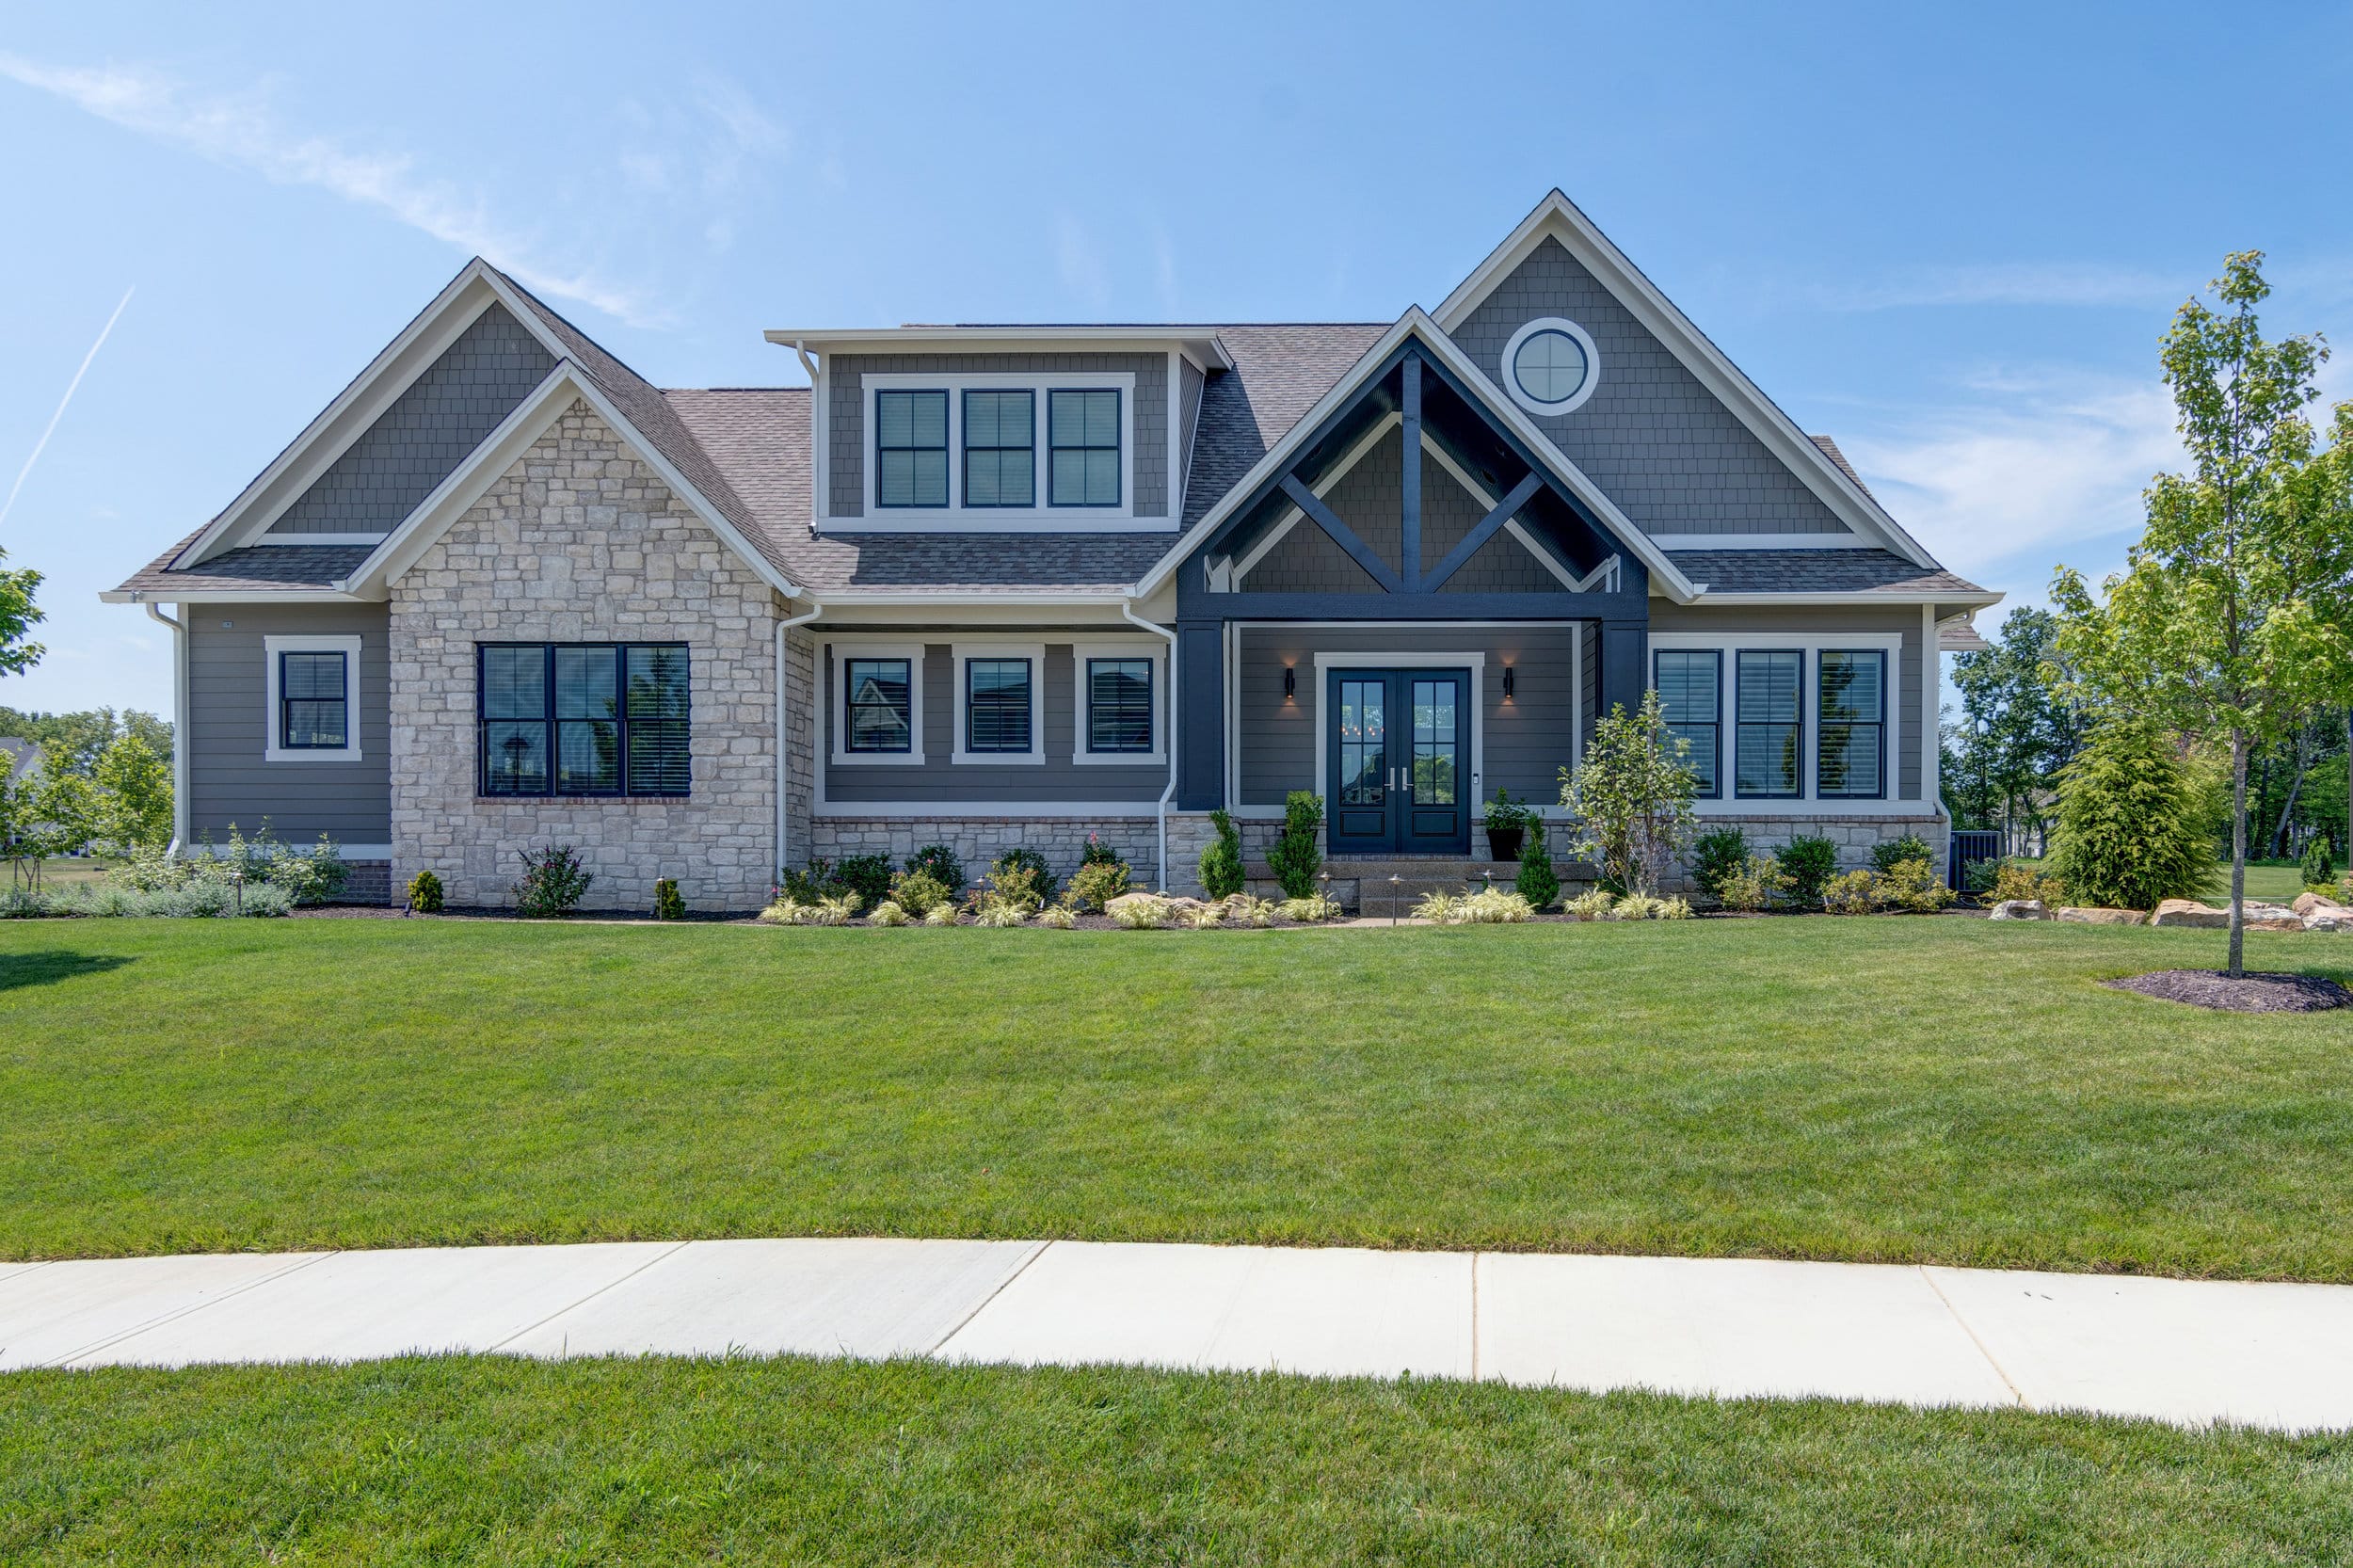 A custom home with a large front yard, built by a reputable custom home builder in Indiana.